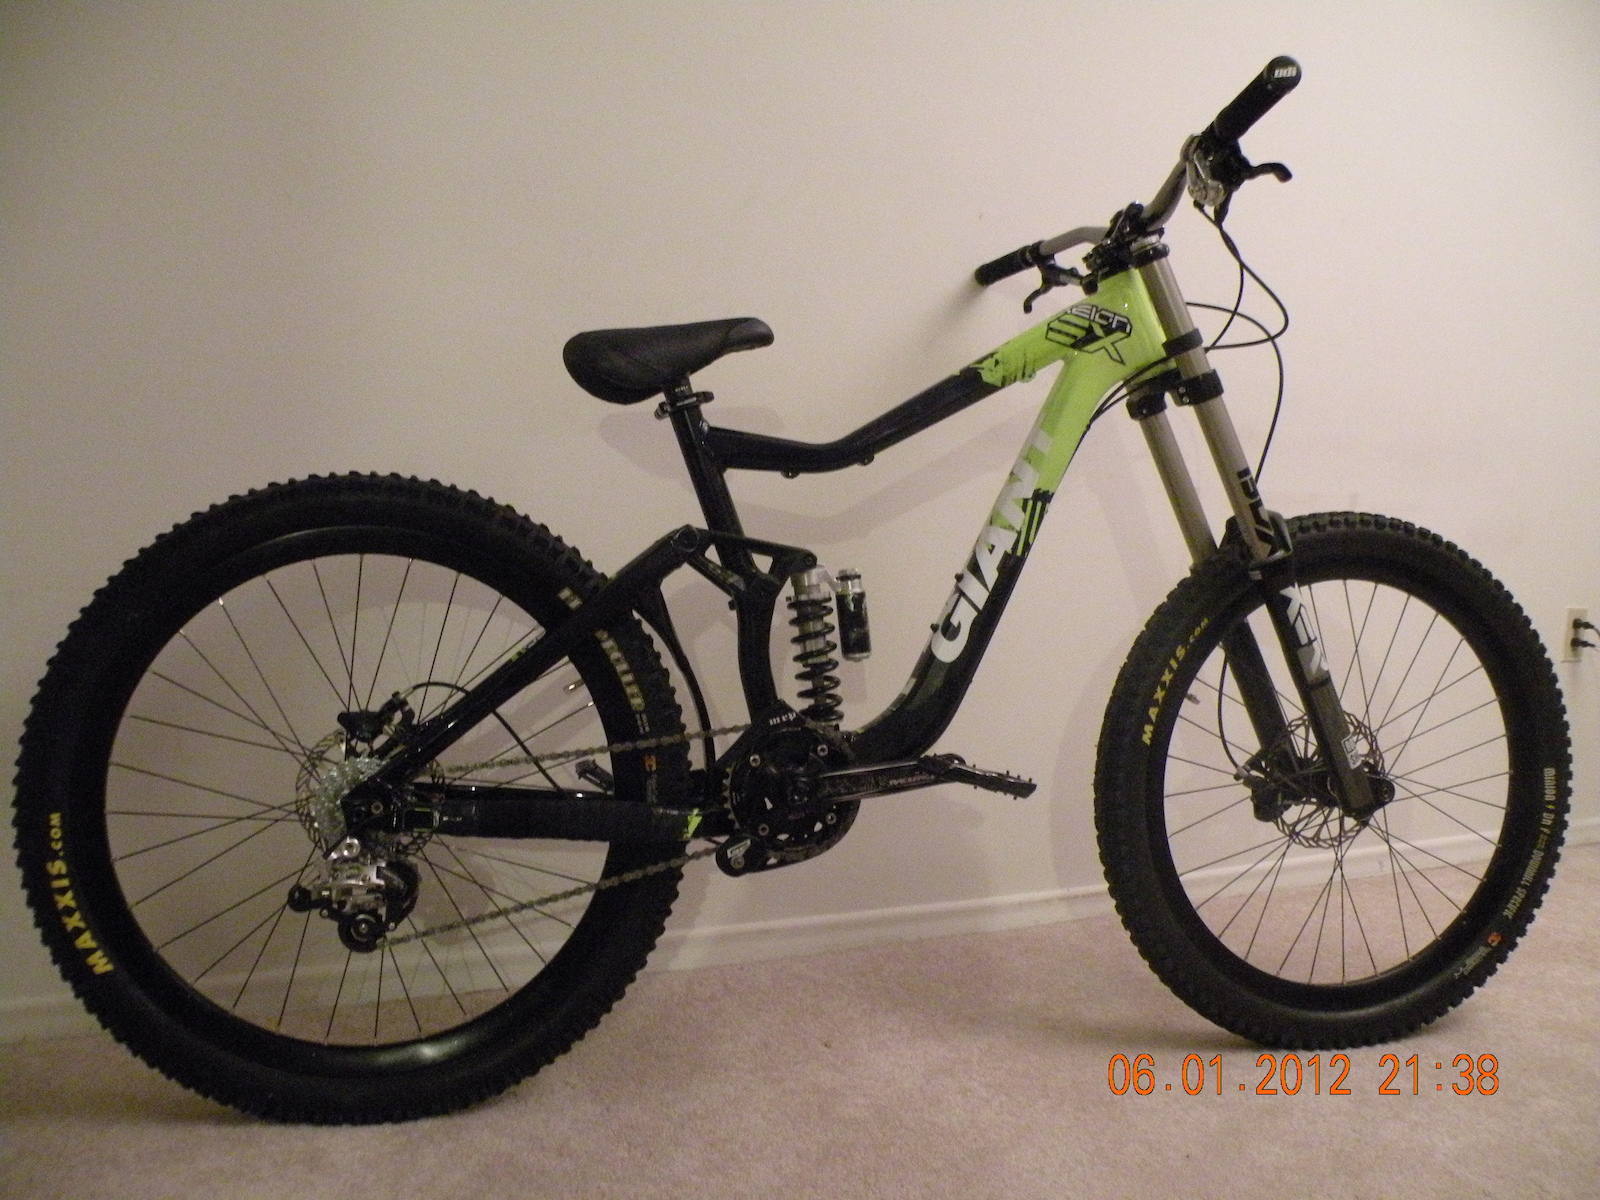 My 2011 Giant Reign SX!